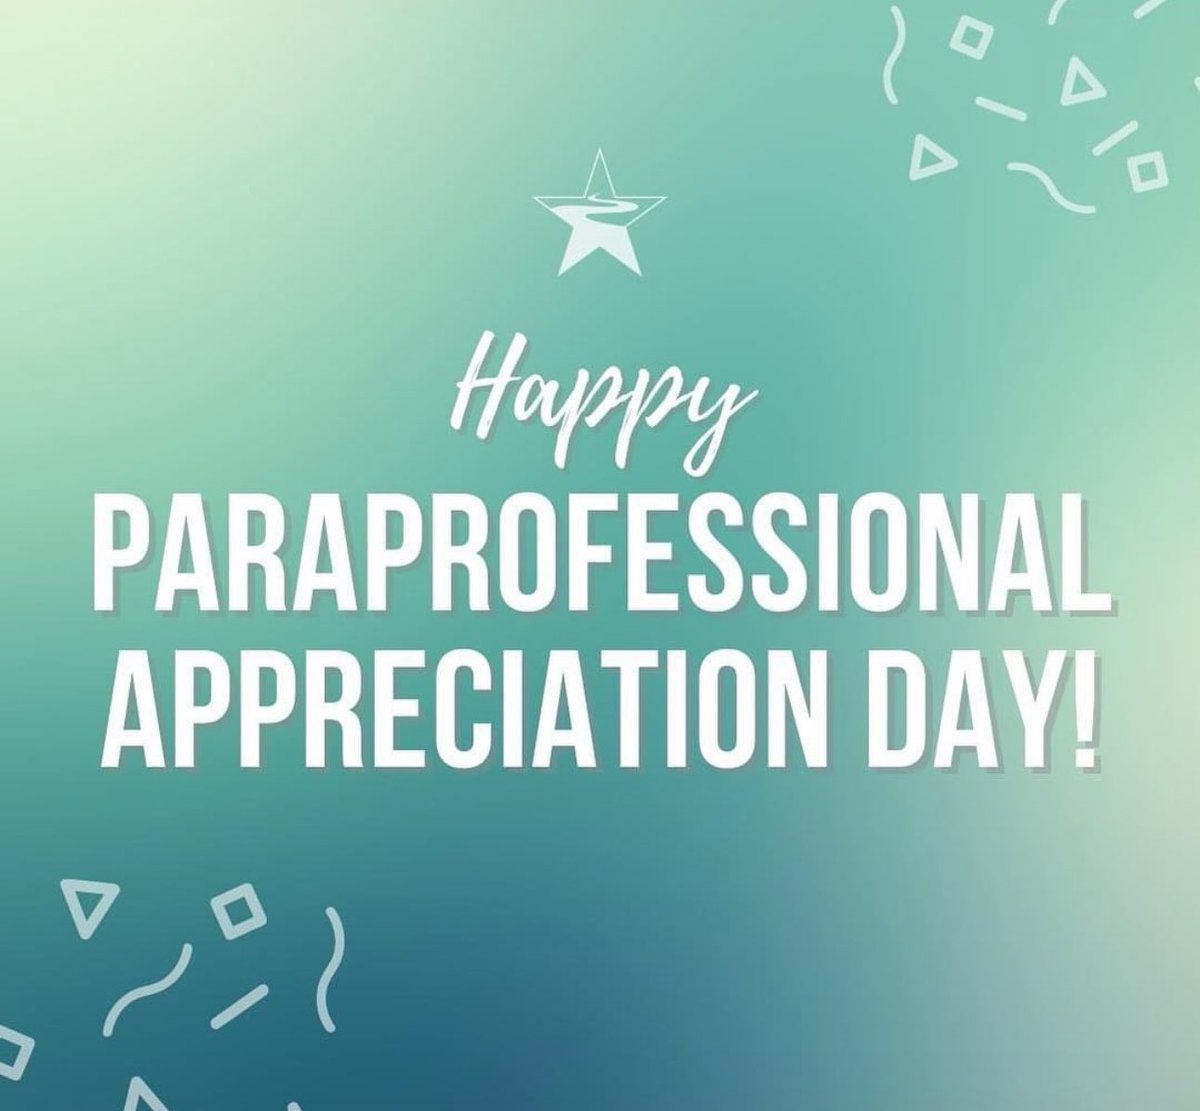 Thank you to our ⁦@MTPSpride⁩ paraprofessionals who do so much to support our students. Your value does not go unnoticed.